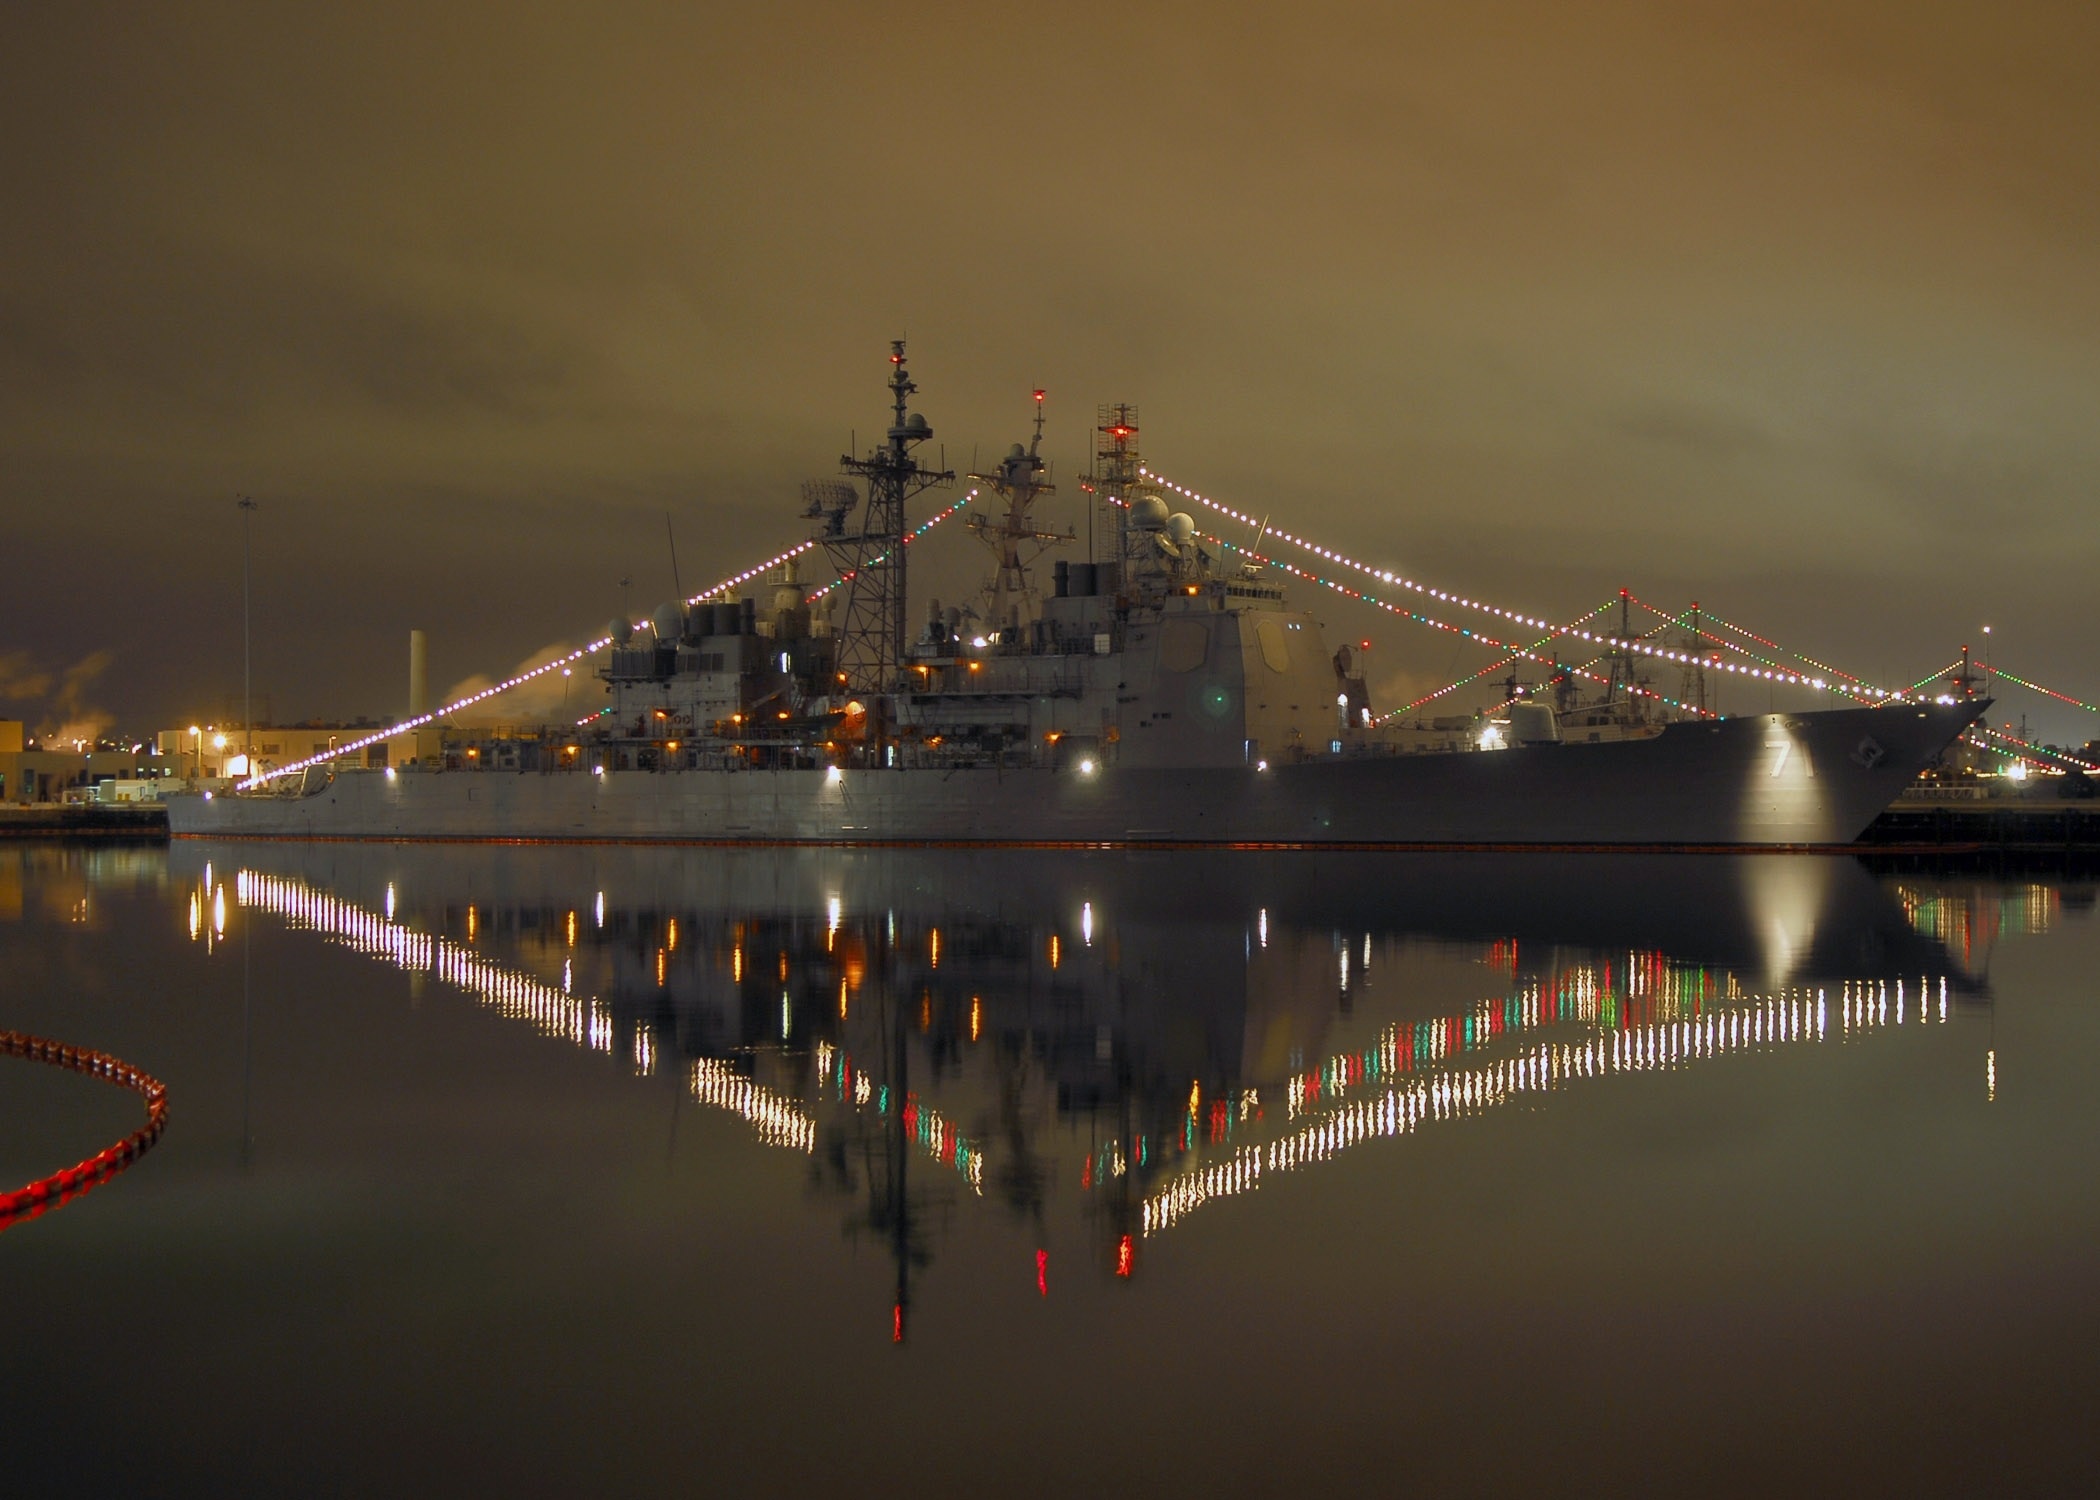 gray lighted ship on water during nighttime